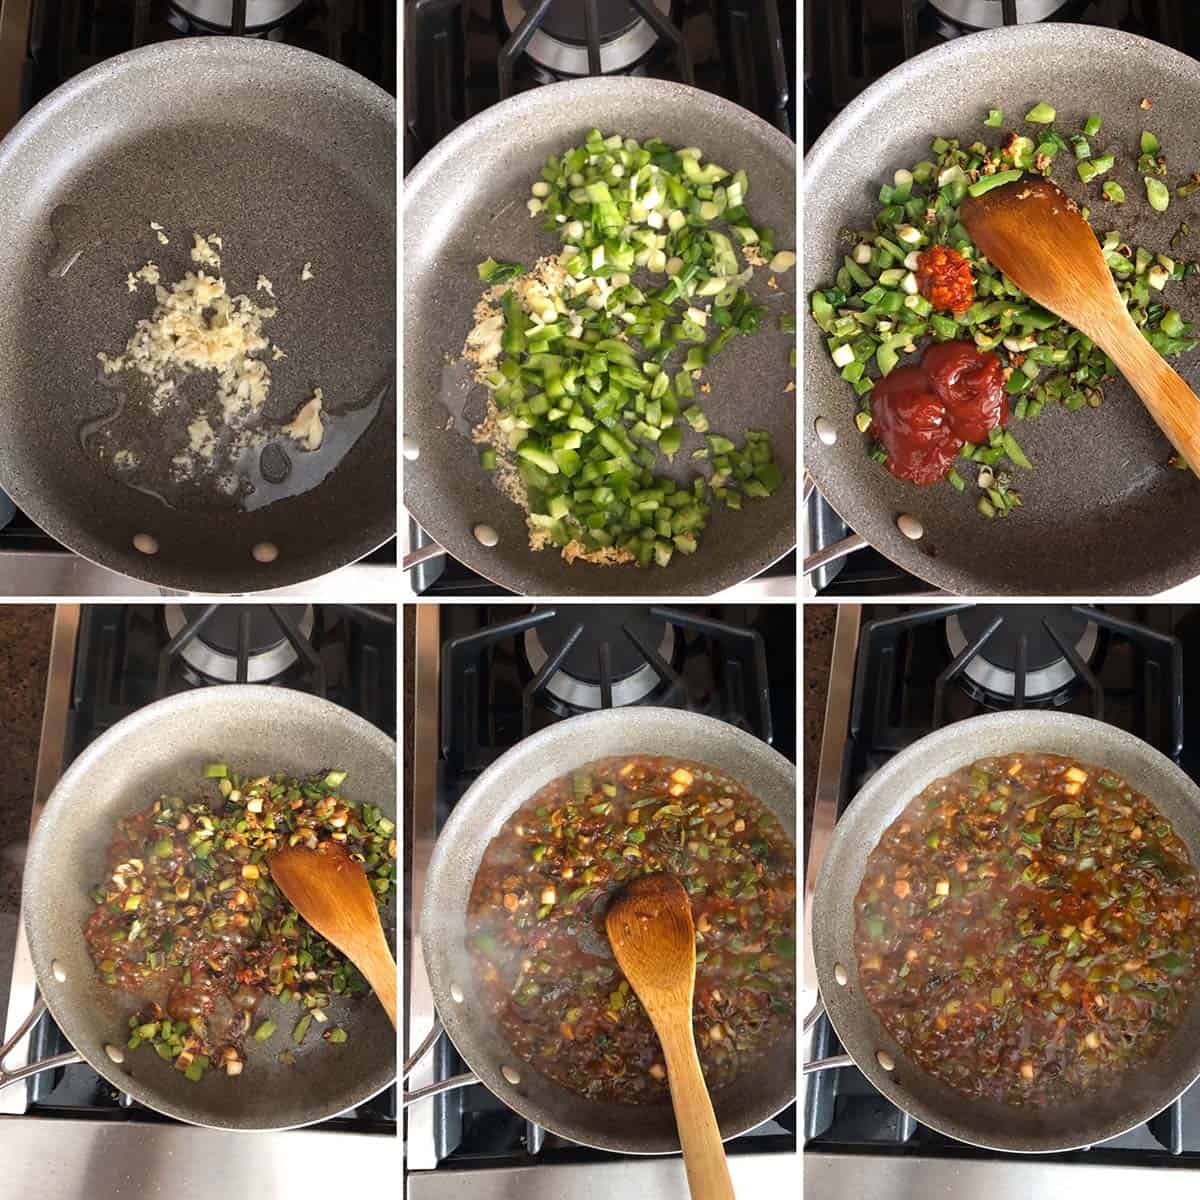 6 panel photo showing the sautéing of veggies for the sauce.